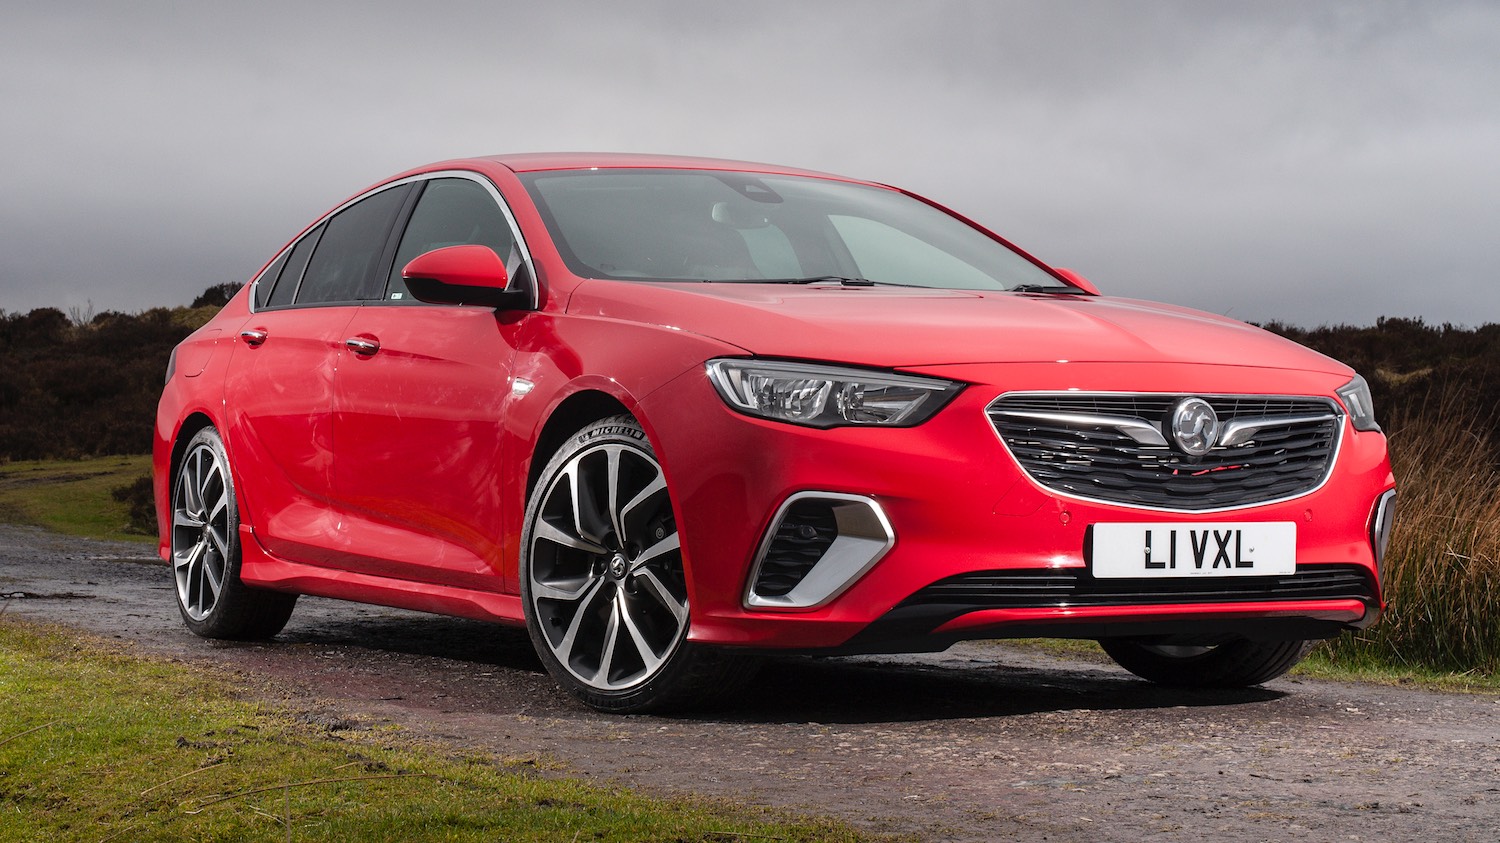 Tom Scanlan reviews the Vauxhall Insignia GSi Sportshatch for Drive 13